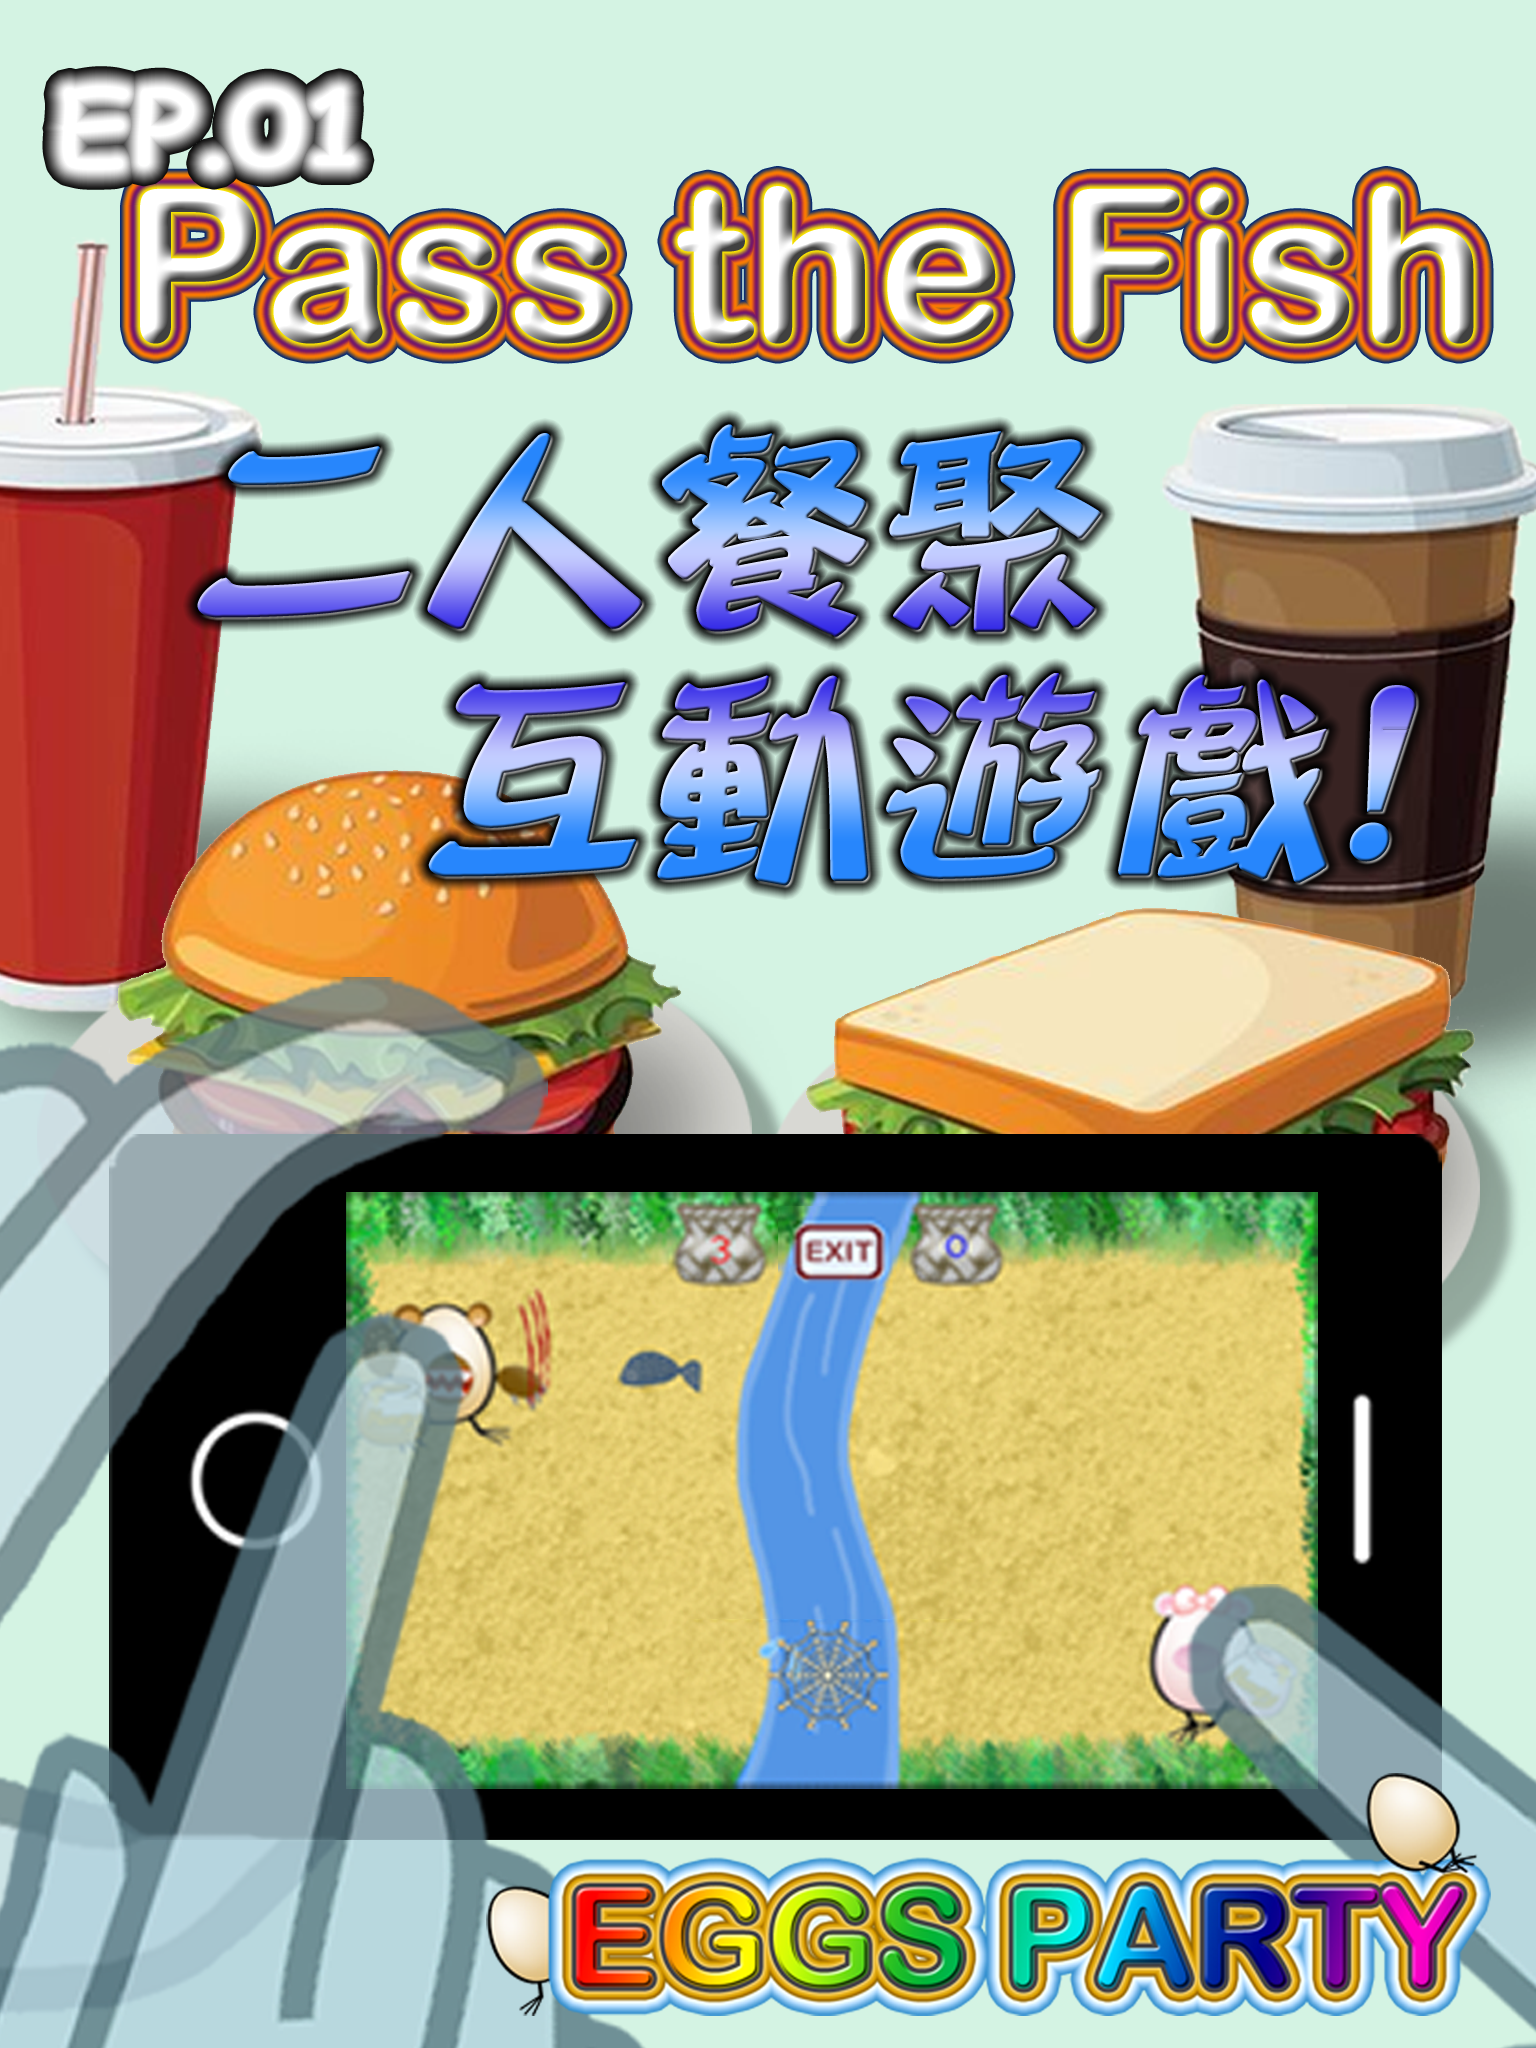 Eggs Party ep1：Pass The Fish遊戲截圖